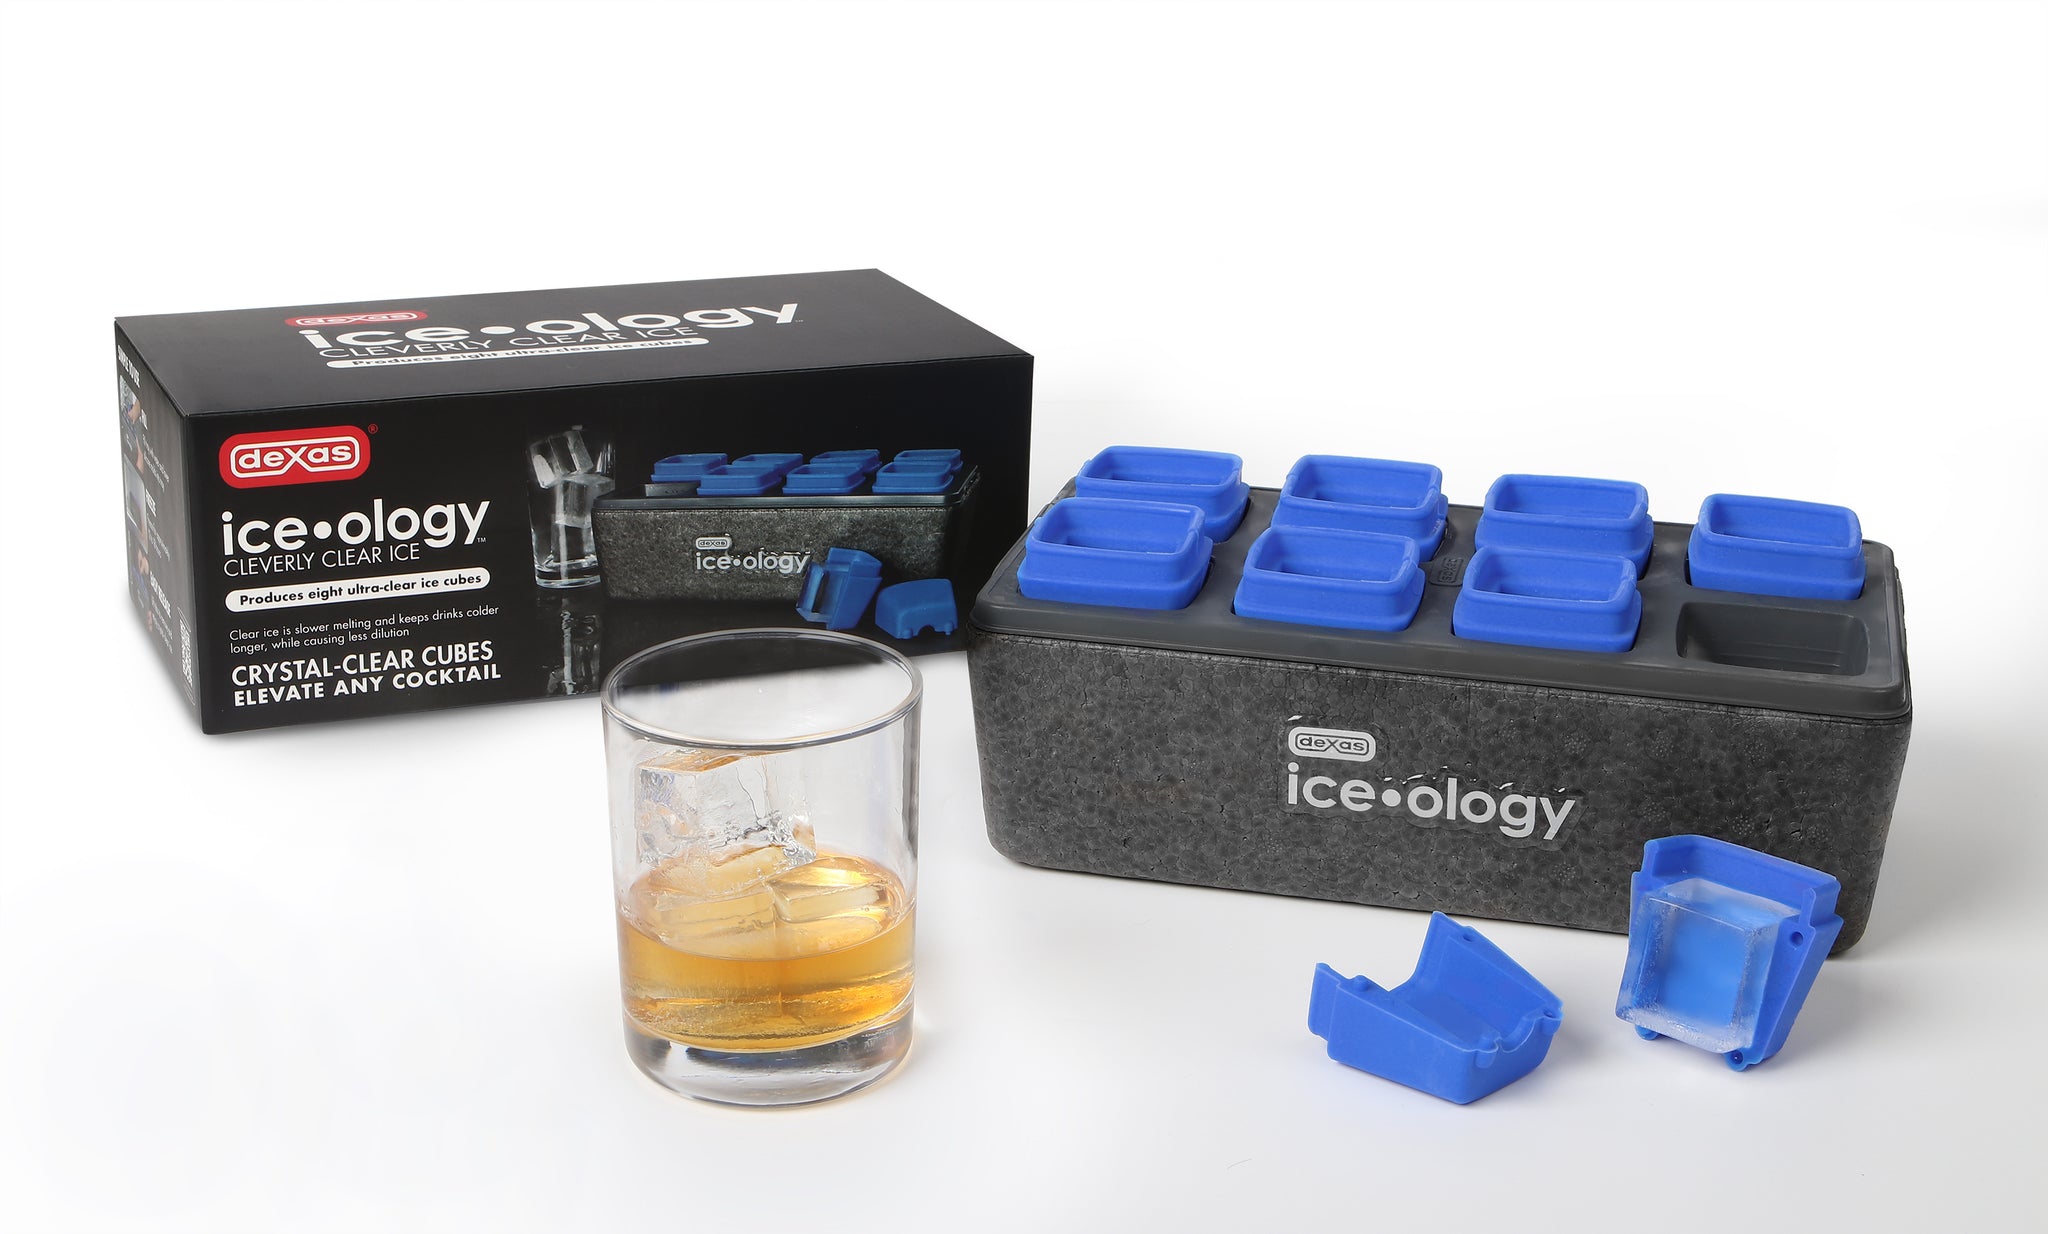 It's never been easier to make "bar quality" clear ice at home! Ice-ology removes impurities and bubbles during the freezing process, resulting in crystal clear ice for your beverages